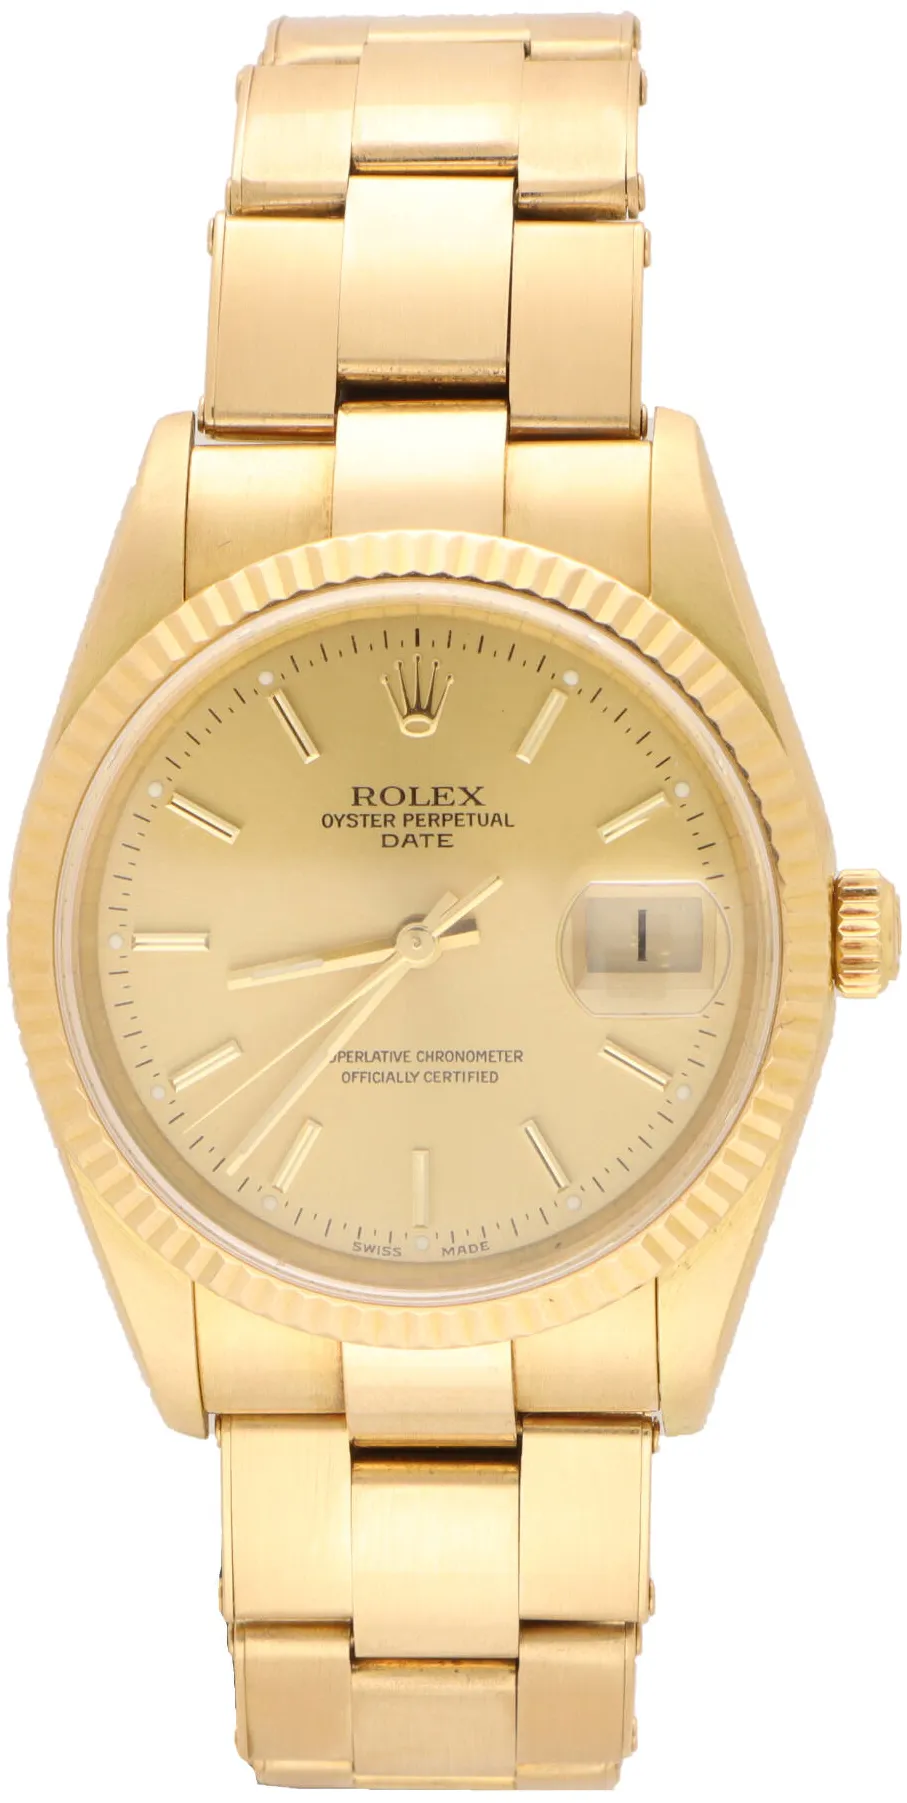 Rolex Oyster Perpetual Date 15238 34mm Yellow gold